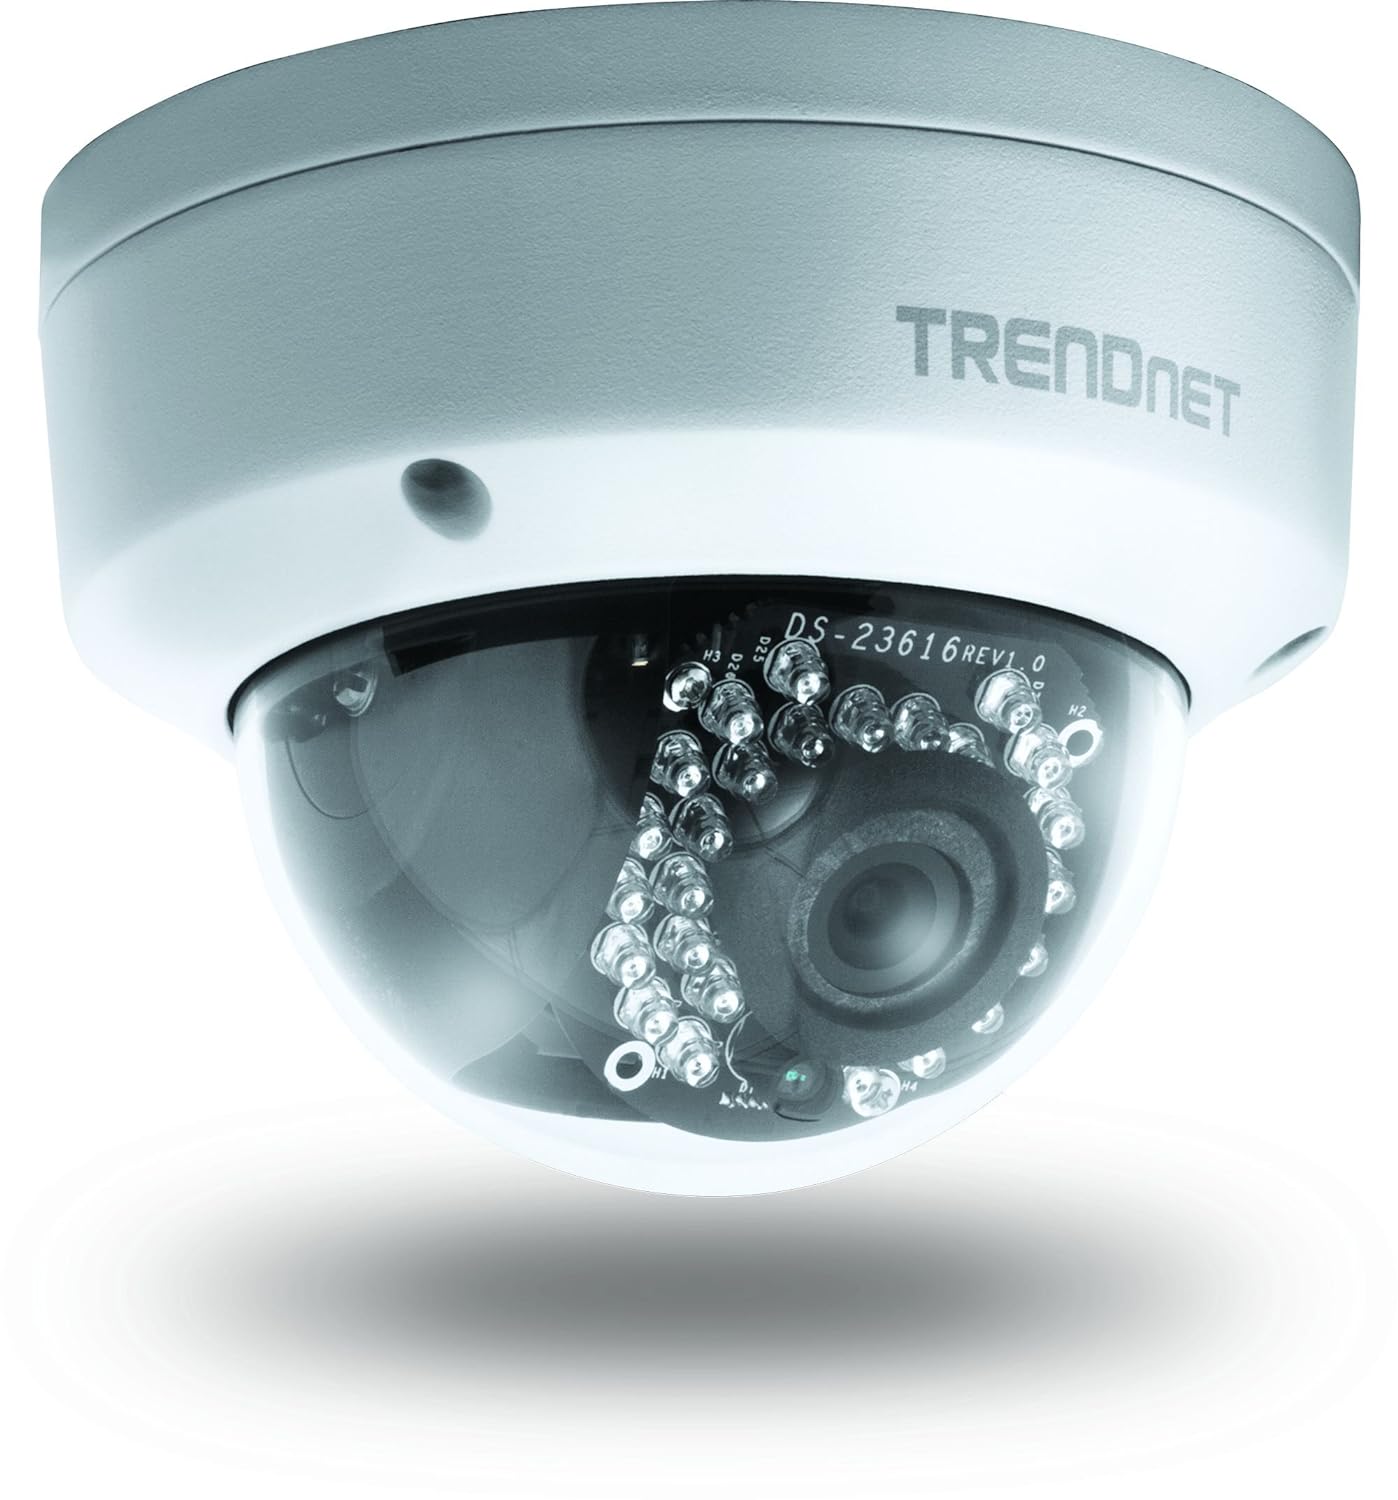 Trendnet TV-IP311PI Outdoor PoE Dome Day/Night